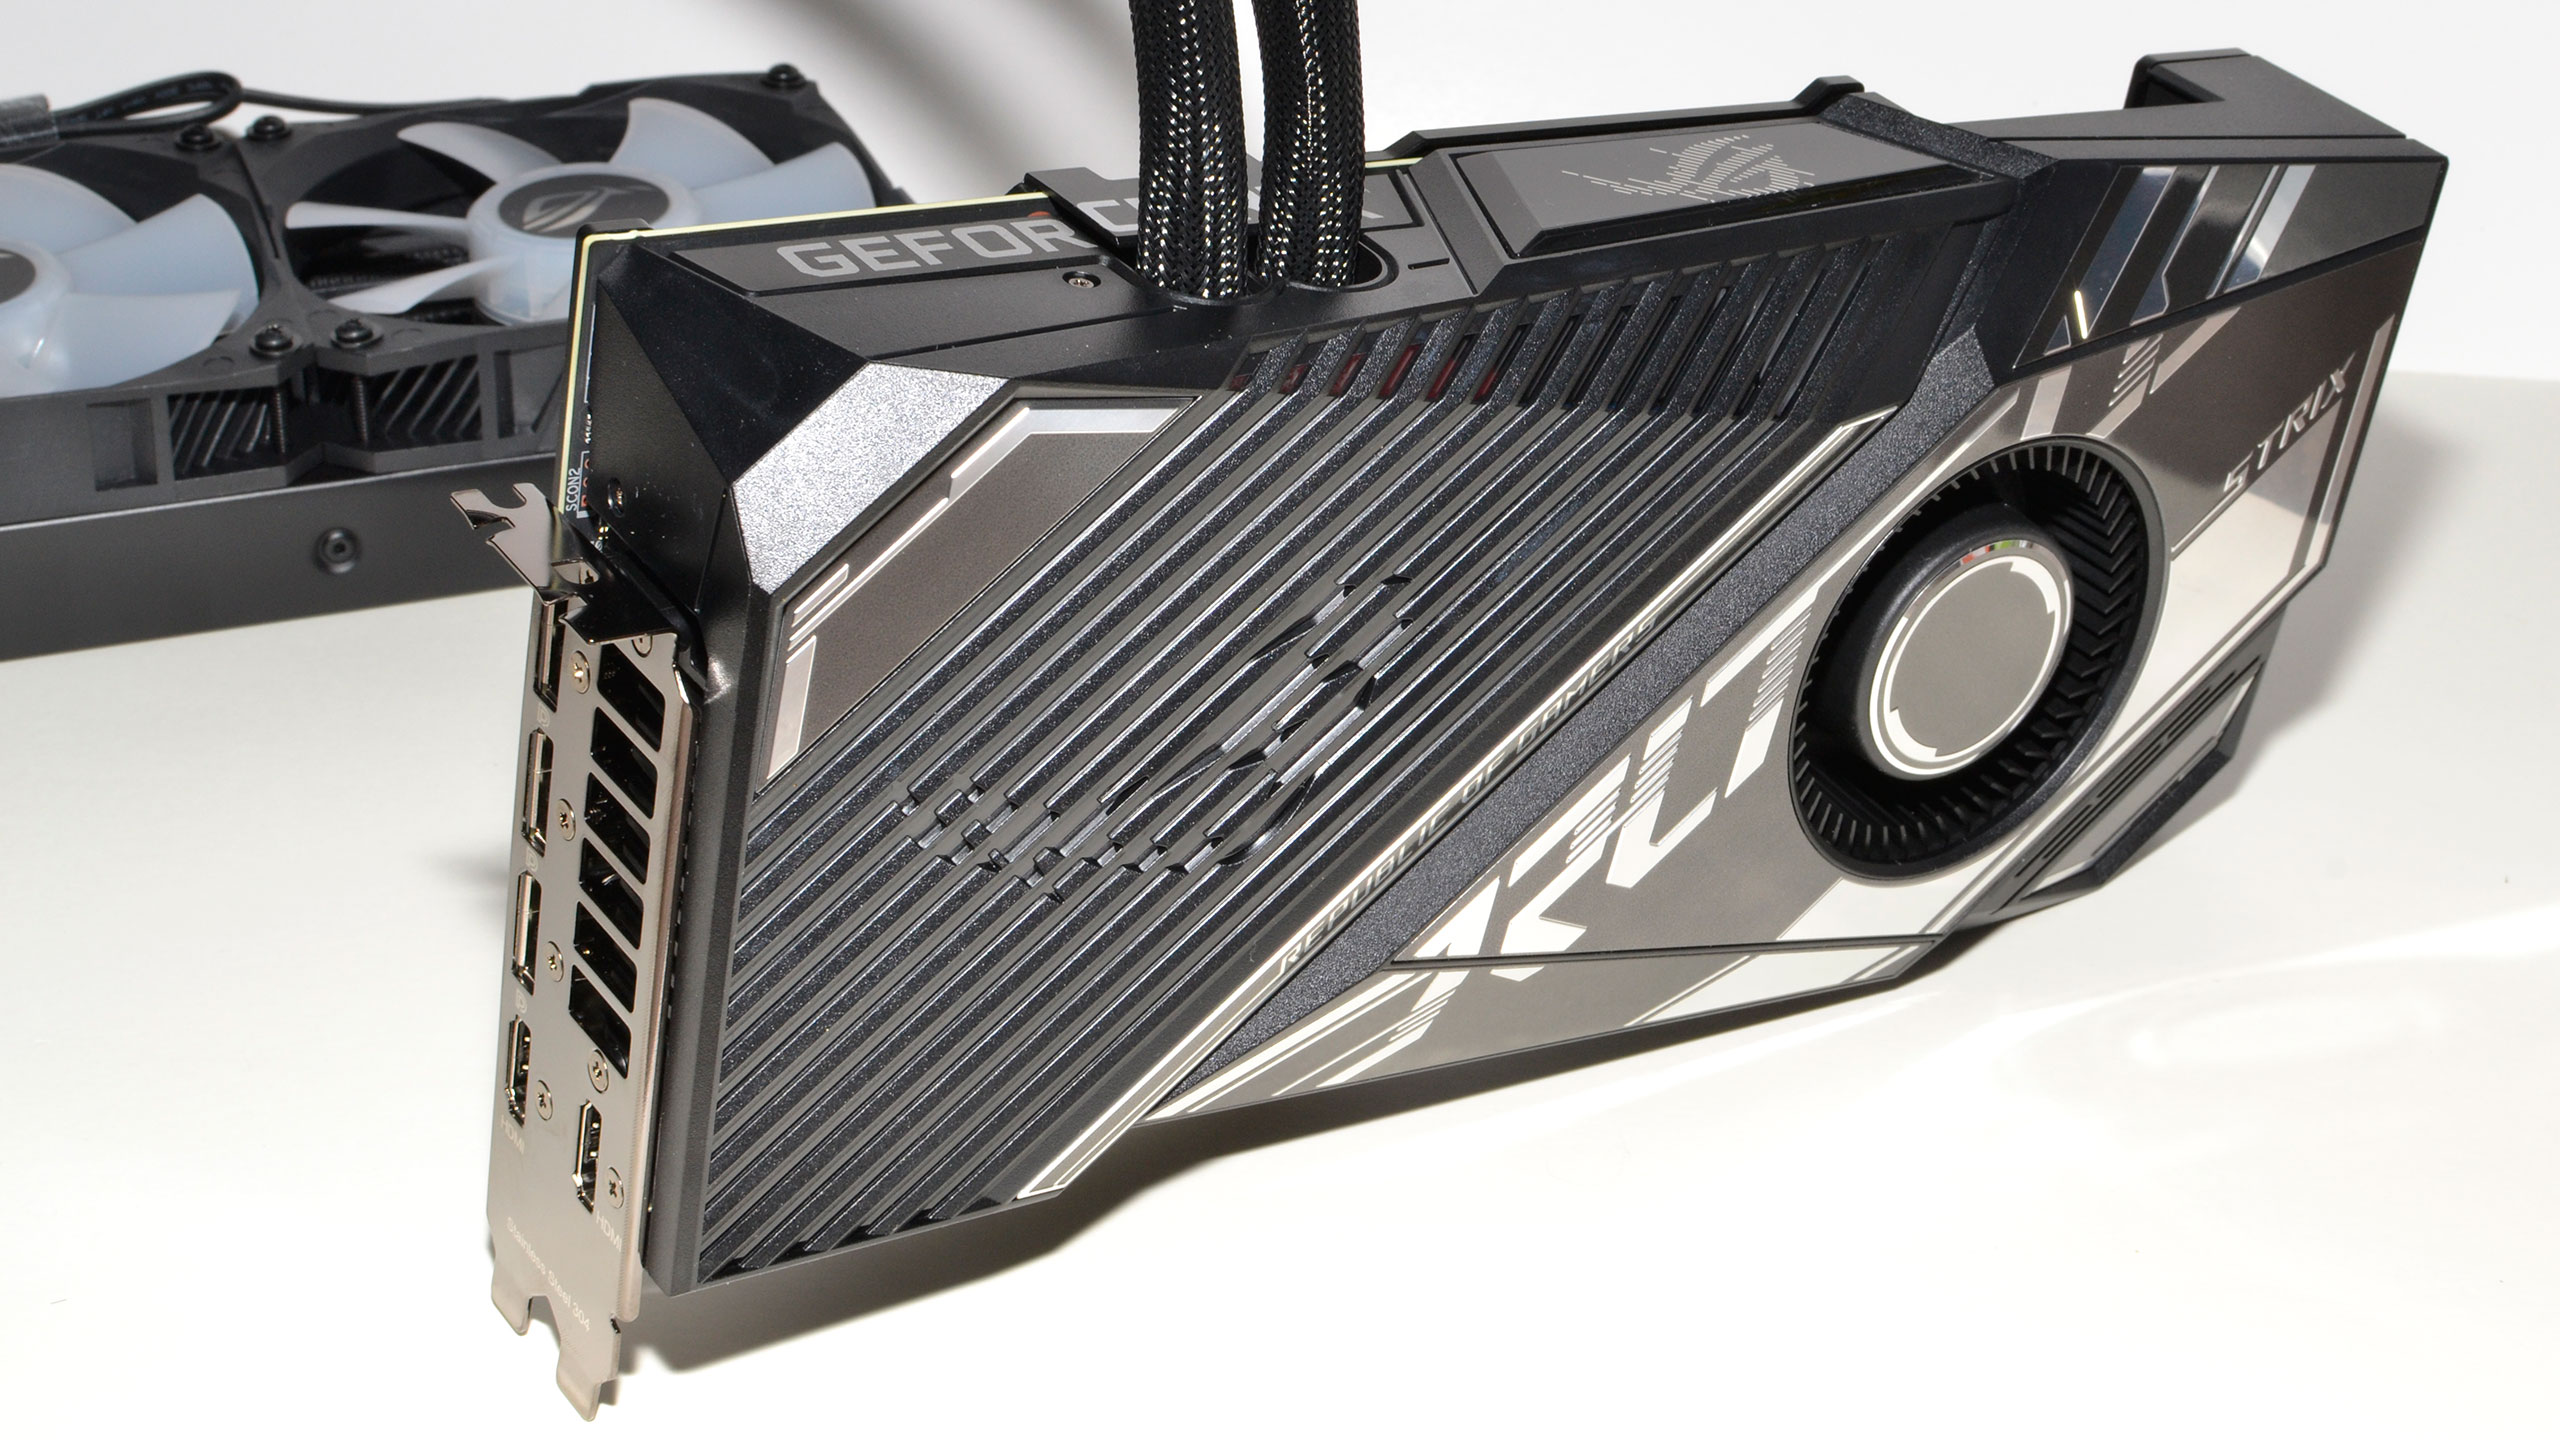 Asus ROG Strix LC GeForce RTX 3080 Ti Review: The Fastest Card We